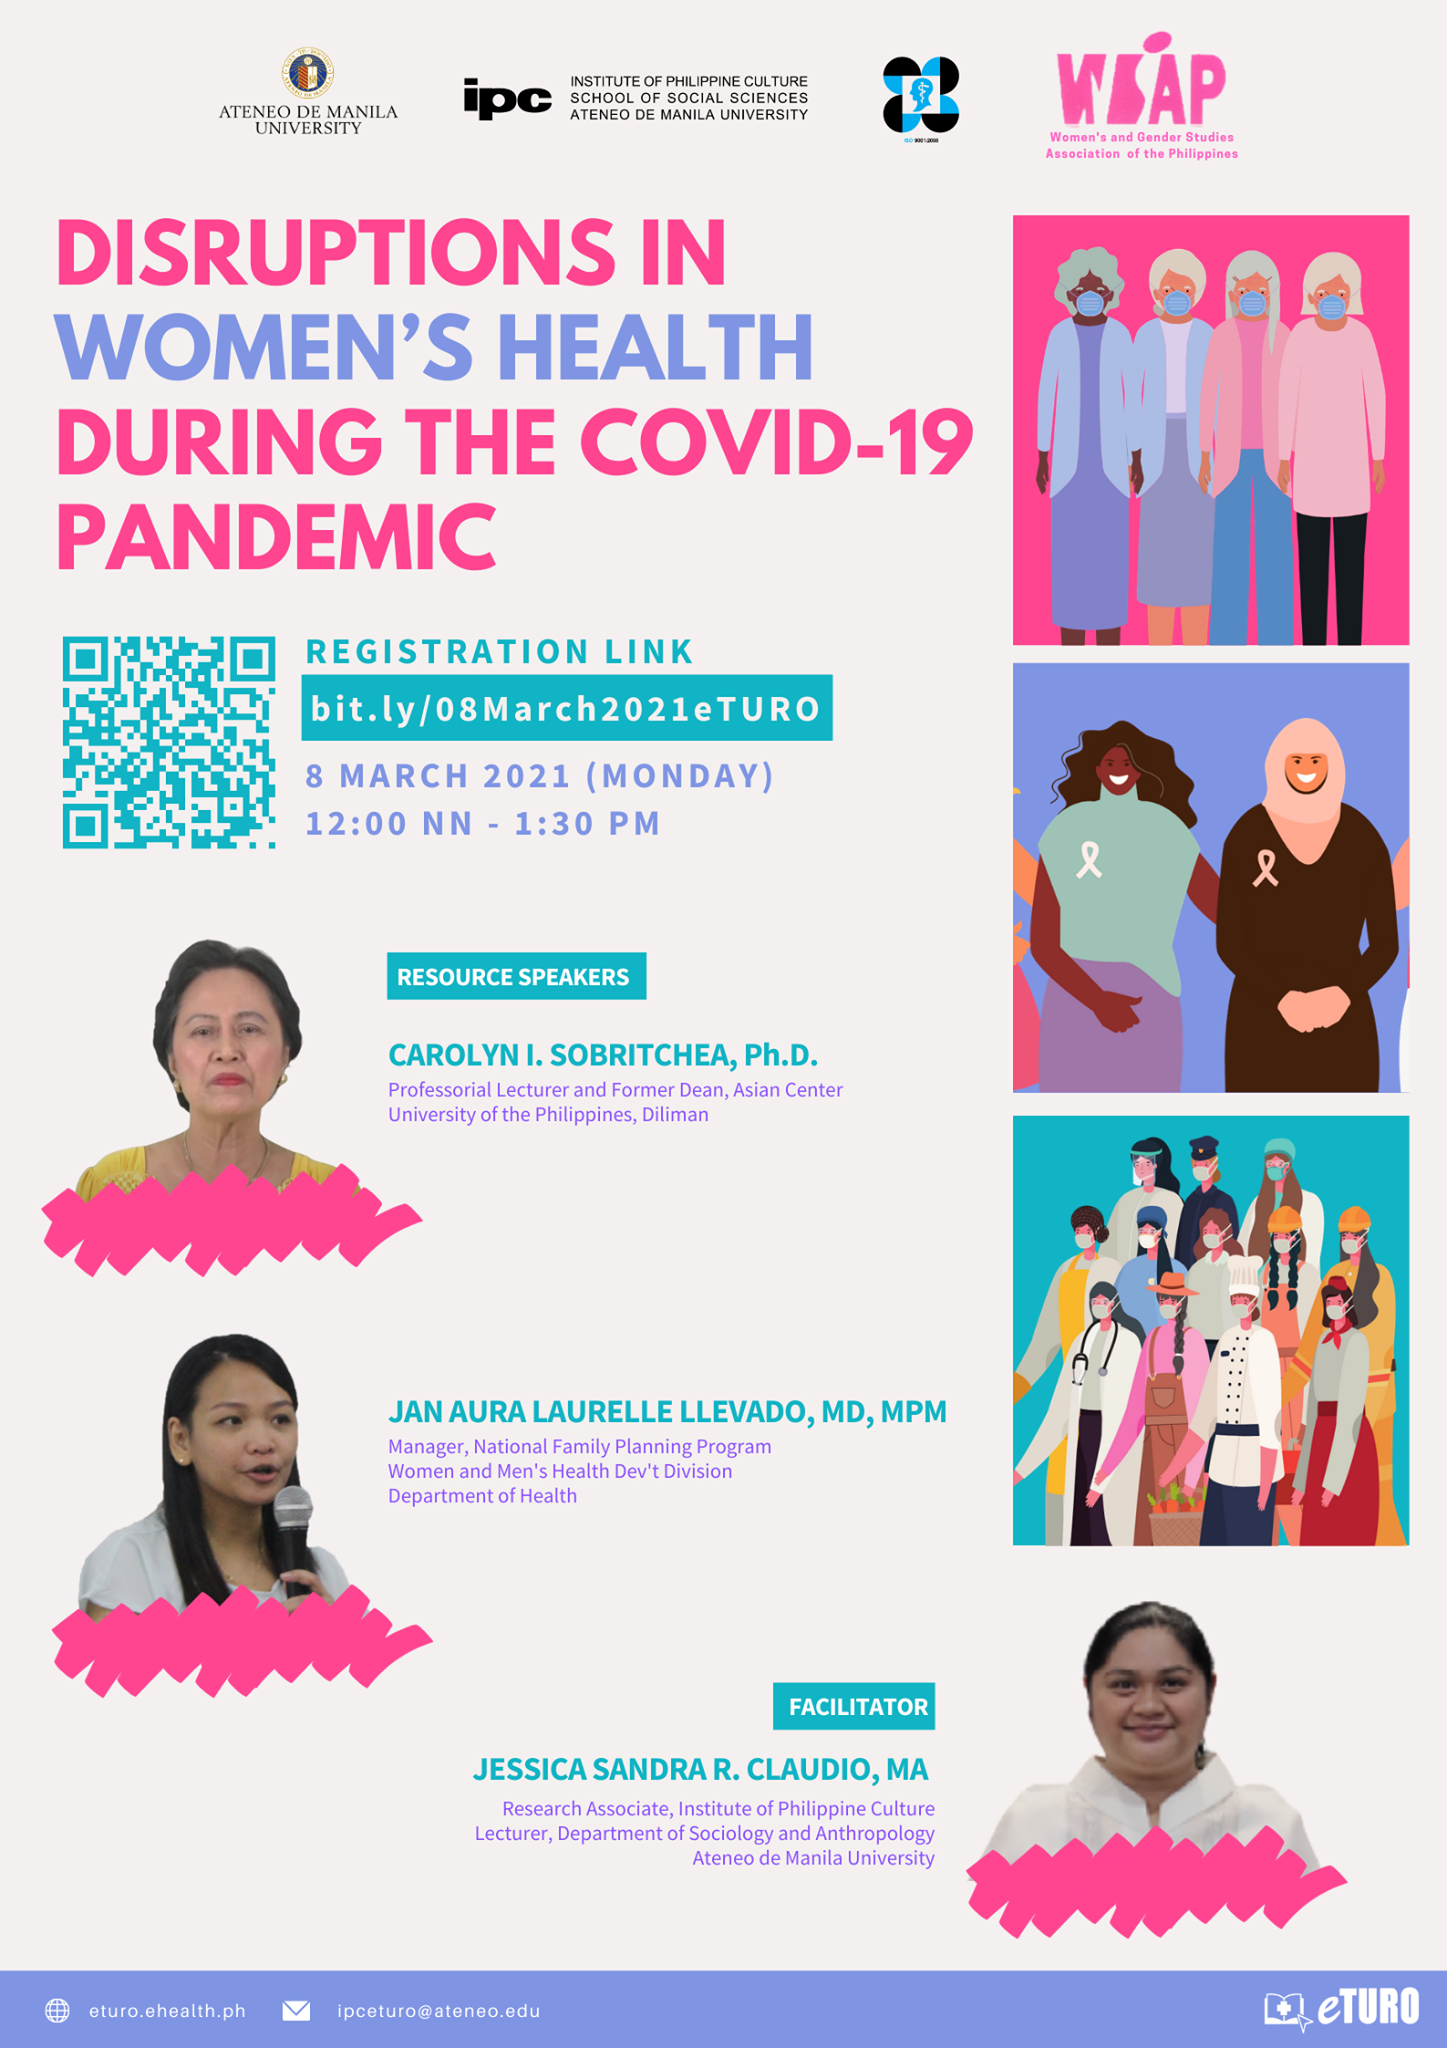 Disruptions in Women’s Health during the COVID-19 Pandemic